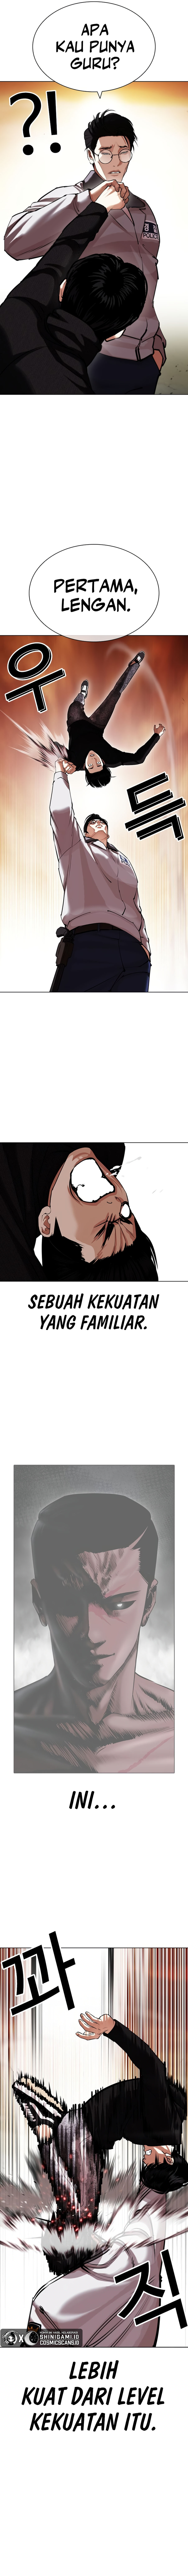 Lookism Chapter 437 Image 18